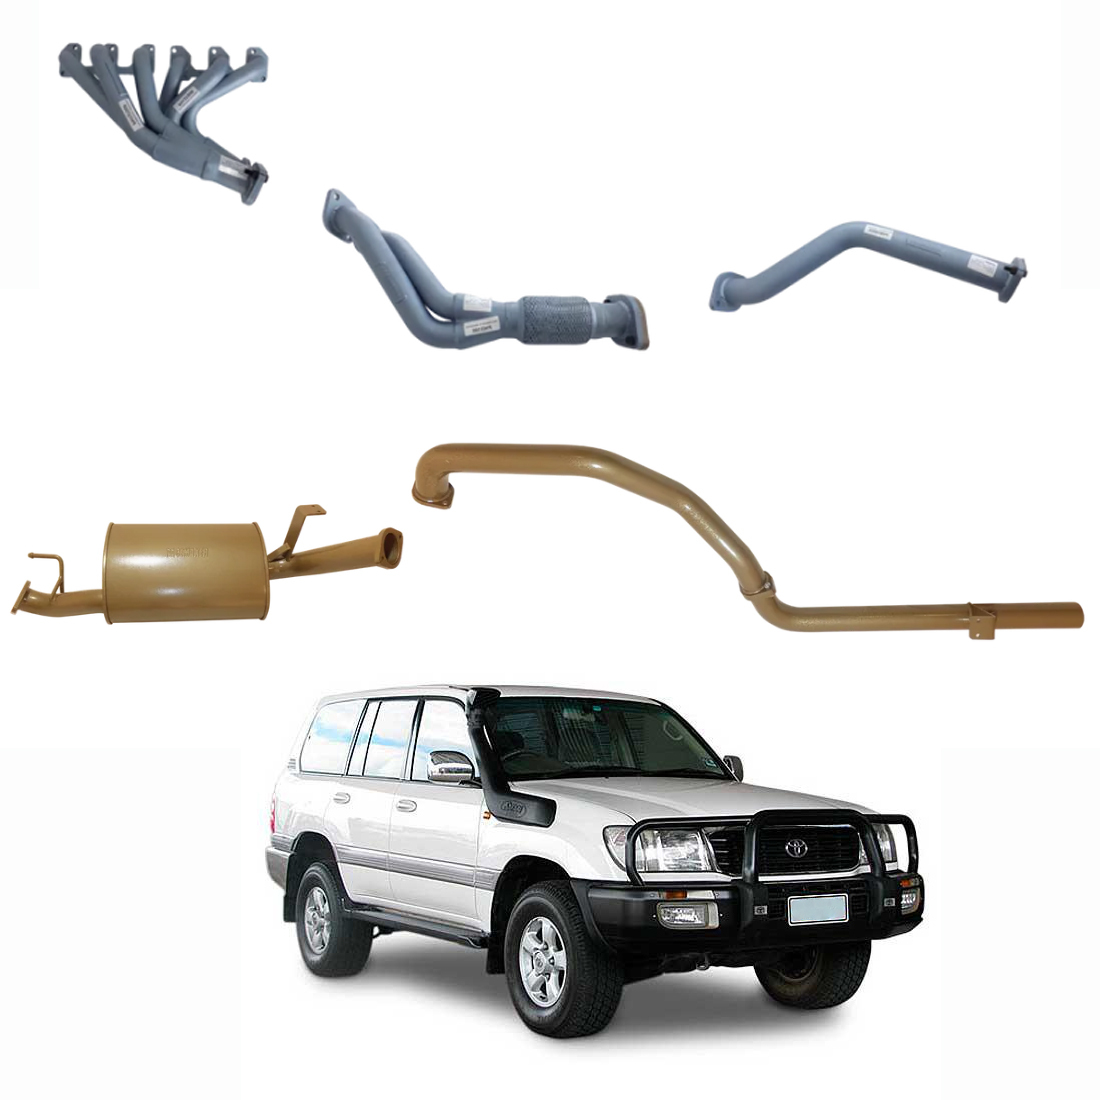 Toyota Landcruiser 100/105 Series 6 Cyl 4.2L Diesel 1998/2008 Non Turbo - Single 2 1/2" with Headers Kit image